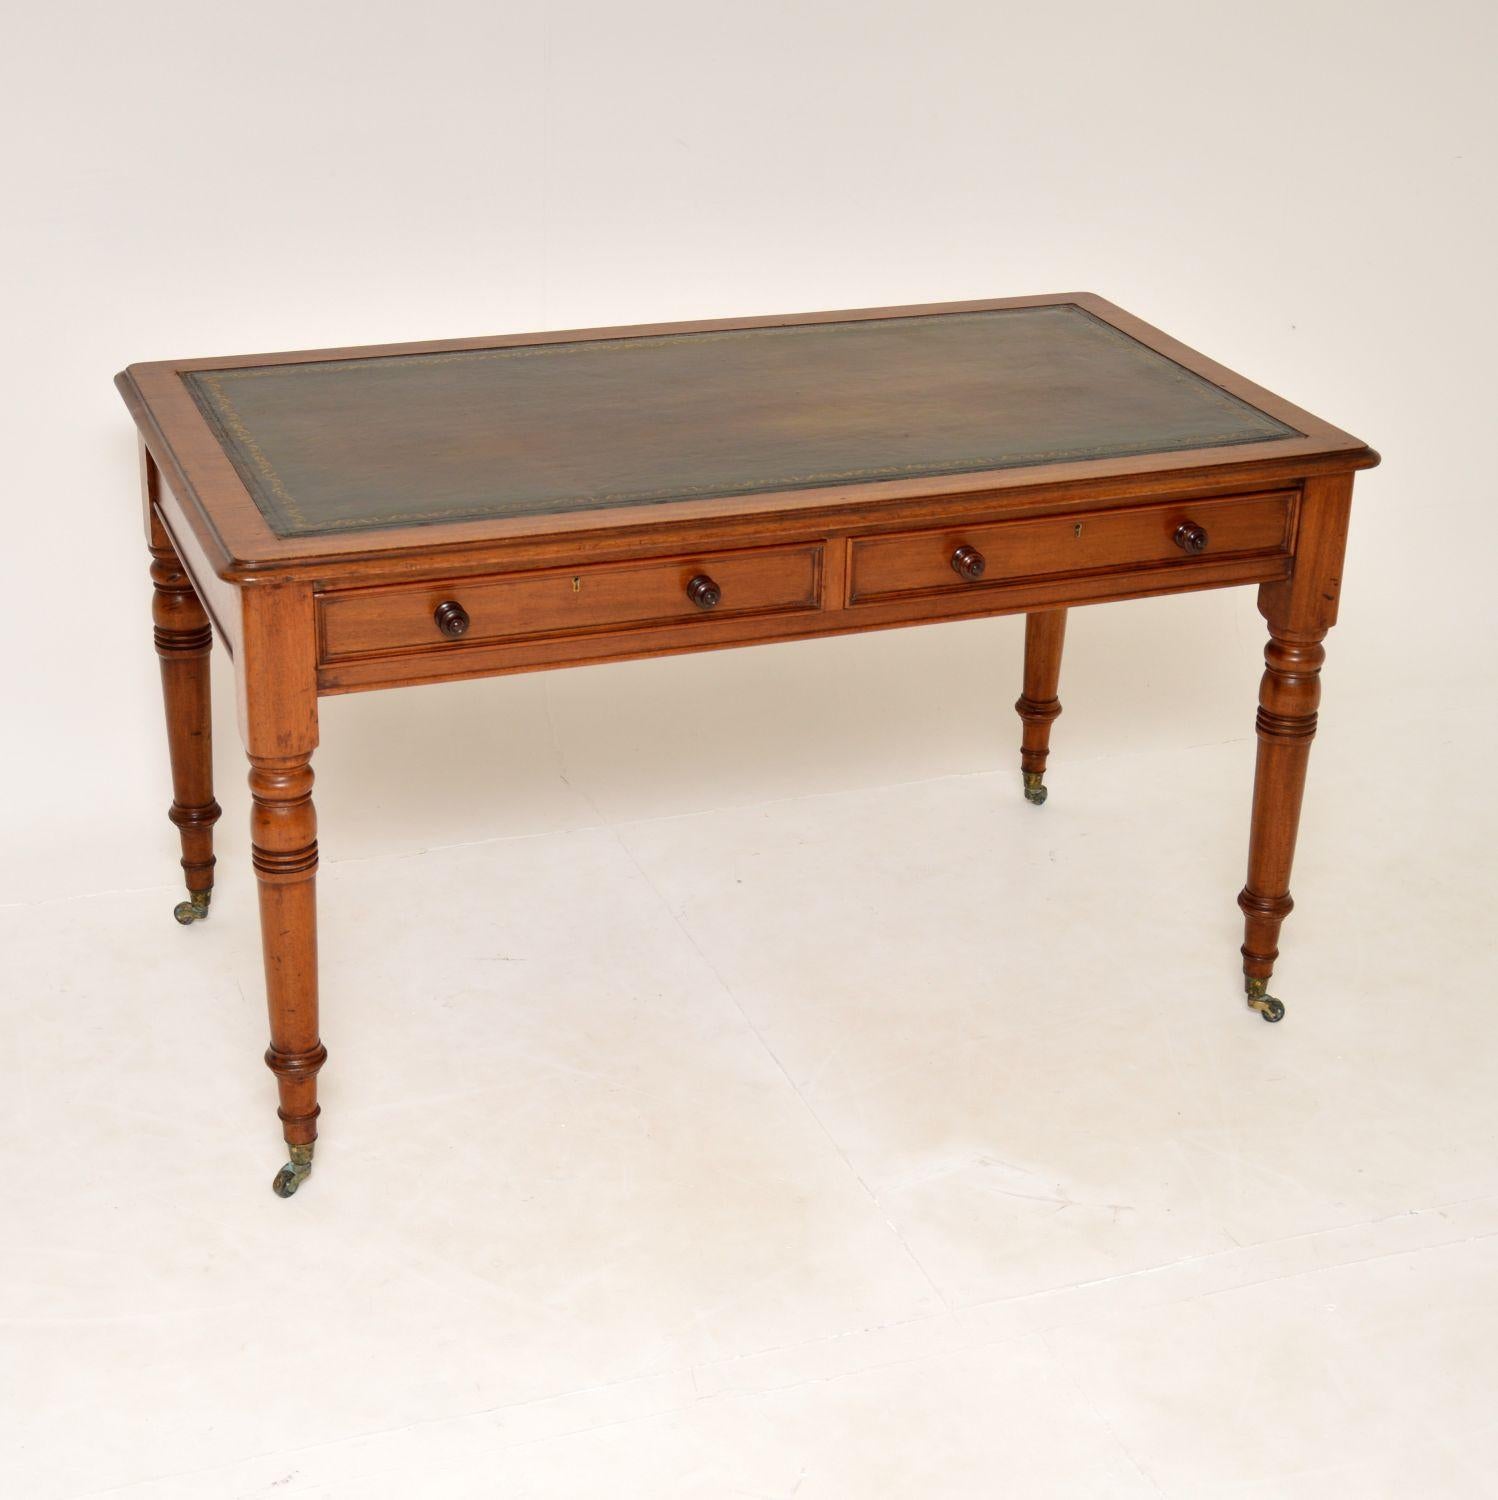 An excellent original antique Victorian writing desk. This was made in England, it dates from the 1860-1880’s.

The quality is superb, this sits on turned solid wood legs with original brass casters. The drawers have nice beading around the edges